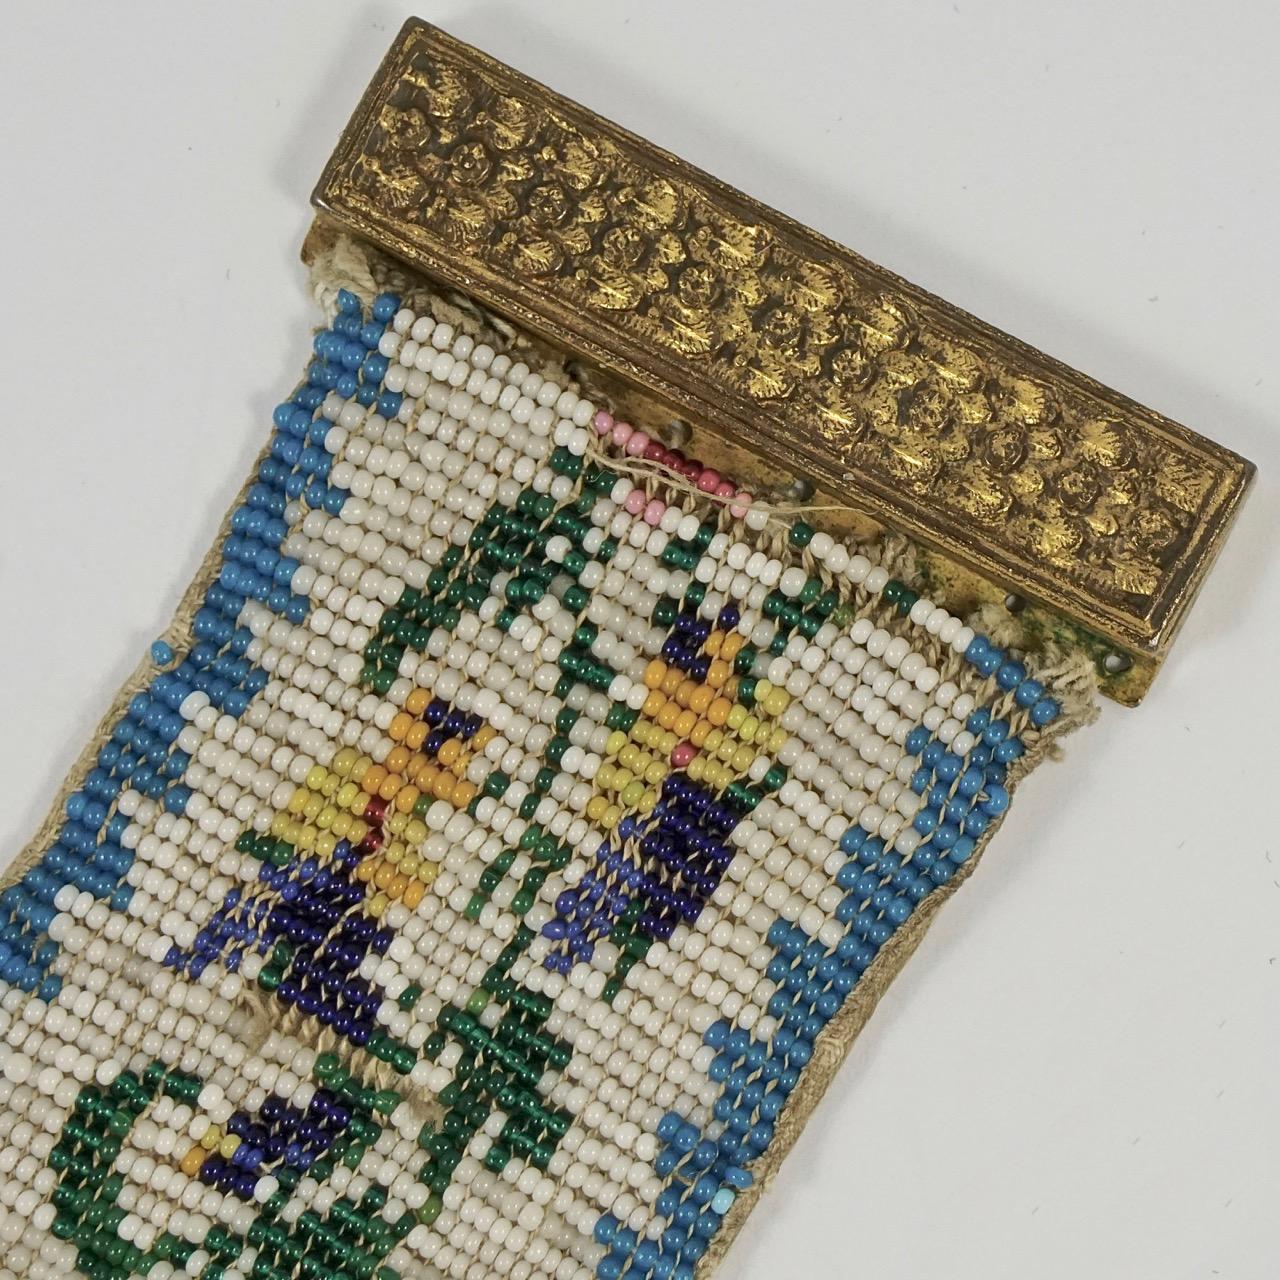 Beautiful Georgian beaded cuff bracelet with a lovely floral design edged in blue, and a decorative floral brass clasp. The beads are lined with a silk back. It is stamped JD. Measuring length 17cm / 6.7 inches by width 3.8cm / 1.5 inches. There are